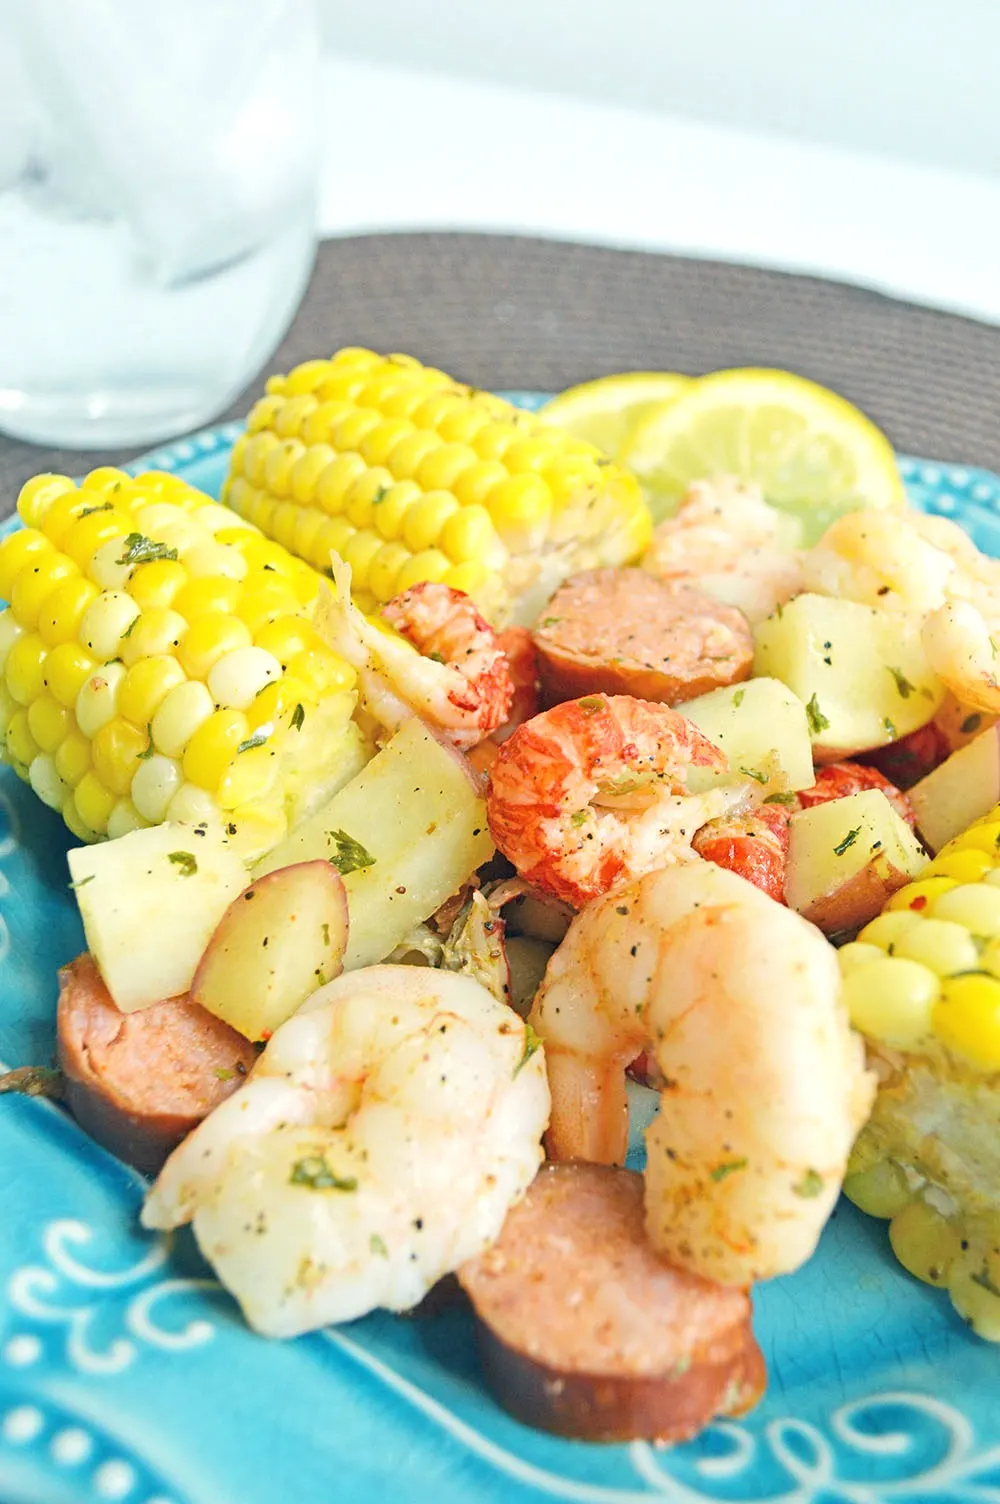 This tasty Cajun Seafood Boil Foil Packets recipe is a delicious meal that calls for very little prep and even less clean-up!